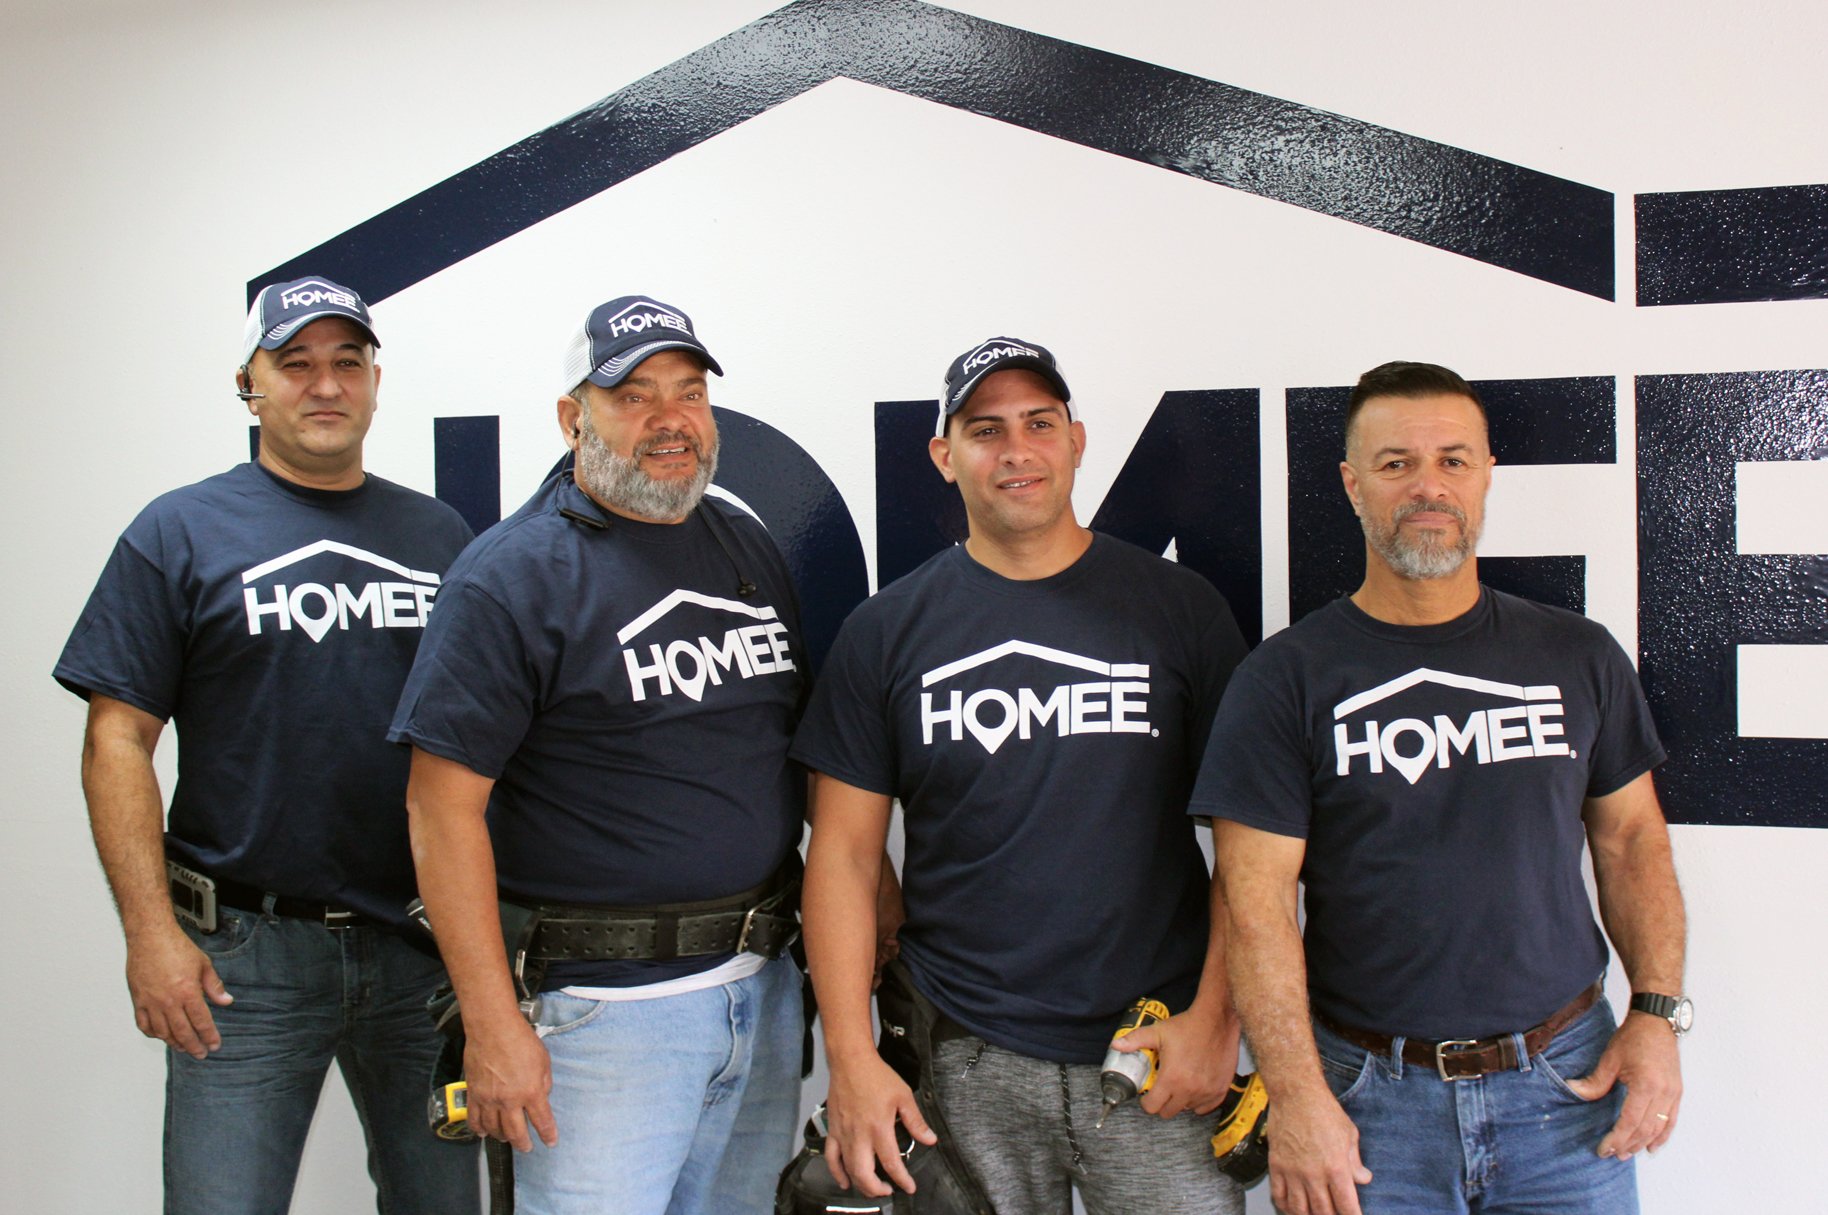 Building Success Together: HOMEE's Approach to Strong Service Provider Relationships